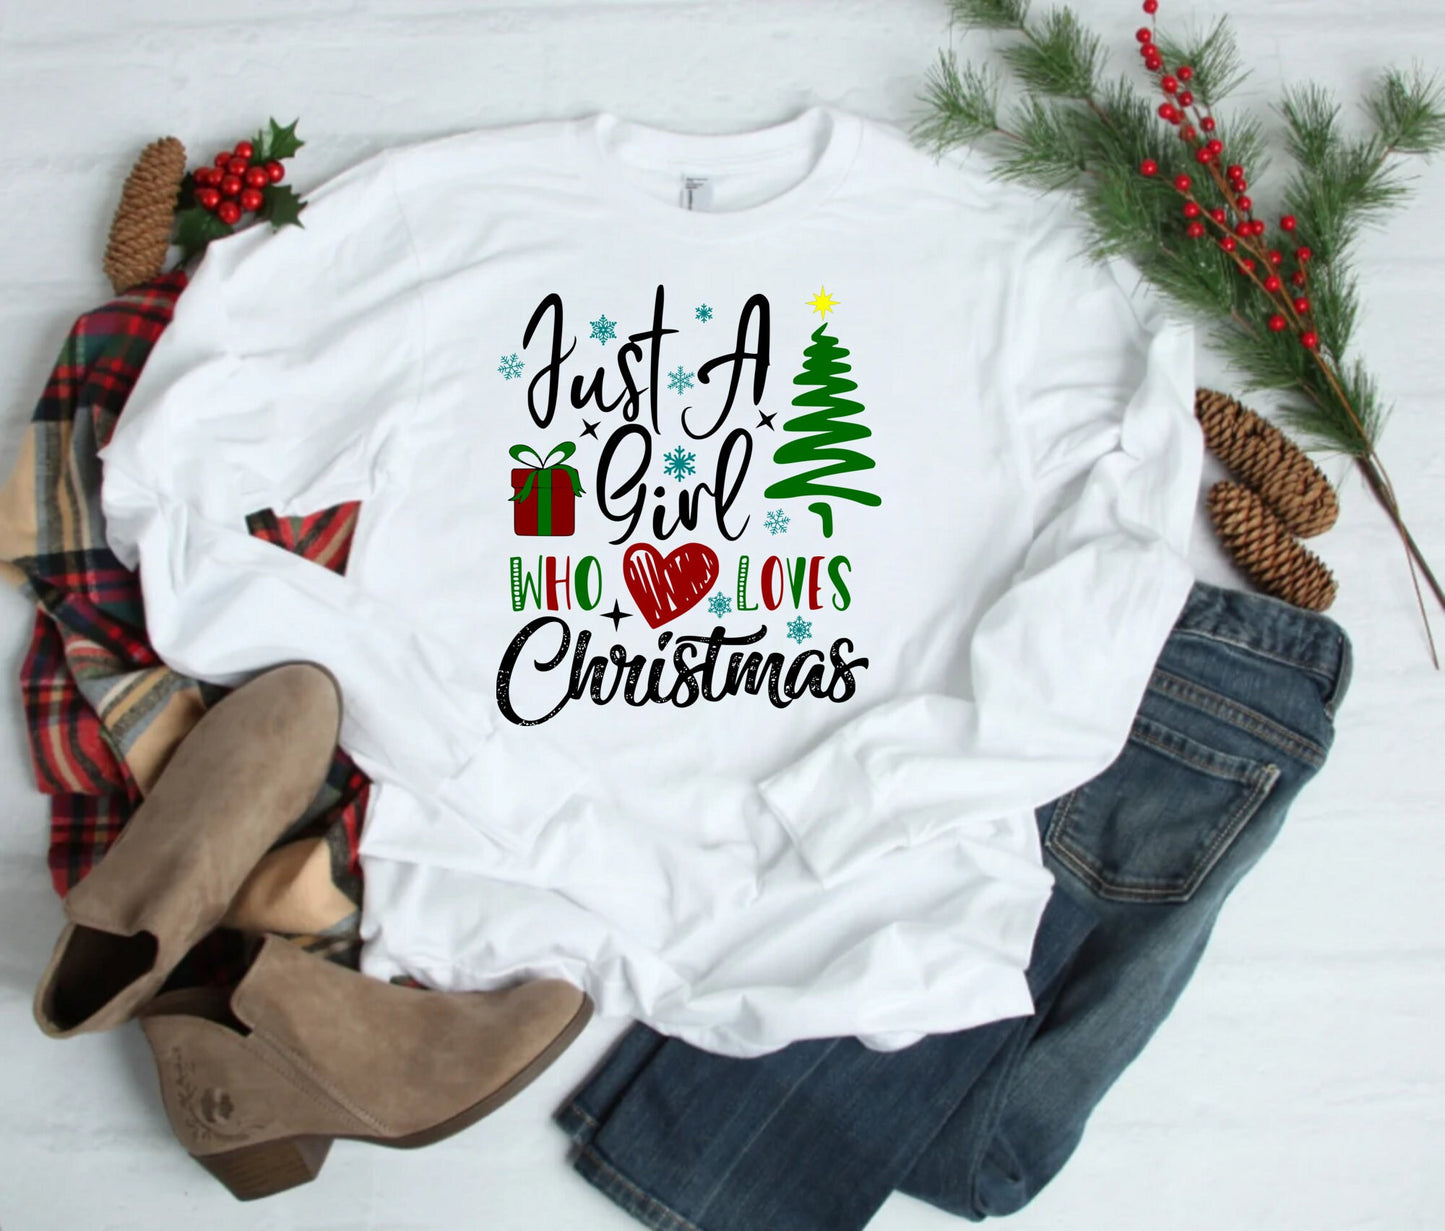 Just A Girl Who Loves Christmas Shirt, Christmas Shirt, Merry Christmas Shirt, Funny Christmas Shirt, Christmas Party Shirt, Holiday Shirt